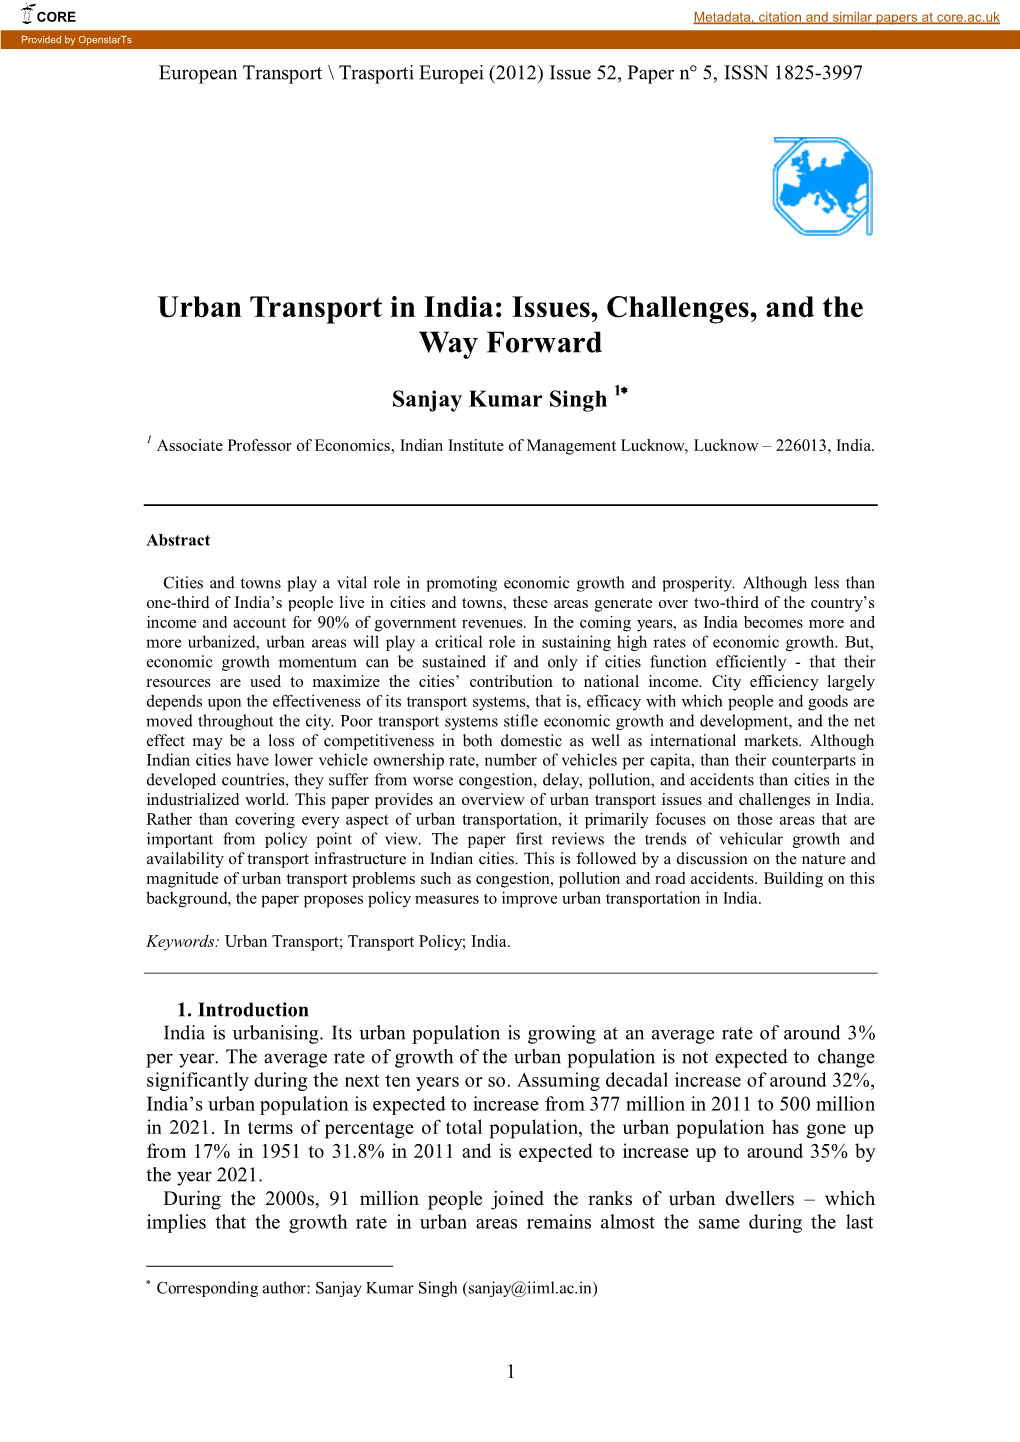 Urban Transport in India: Issues, Challenges, and the Way Forward